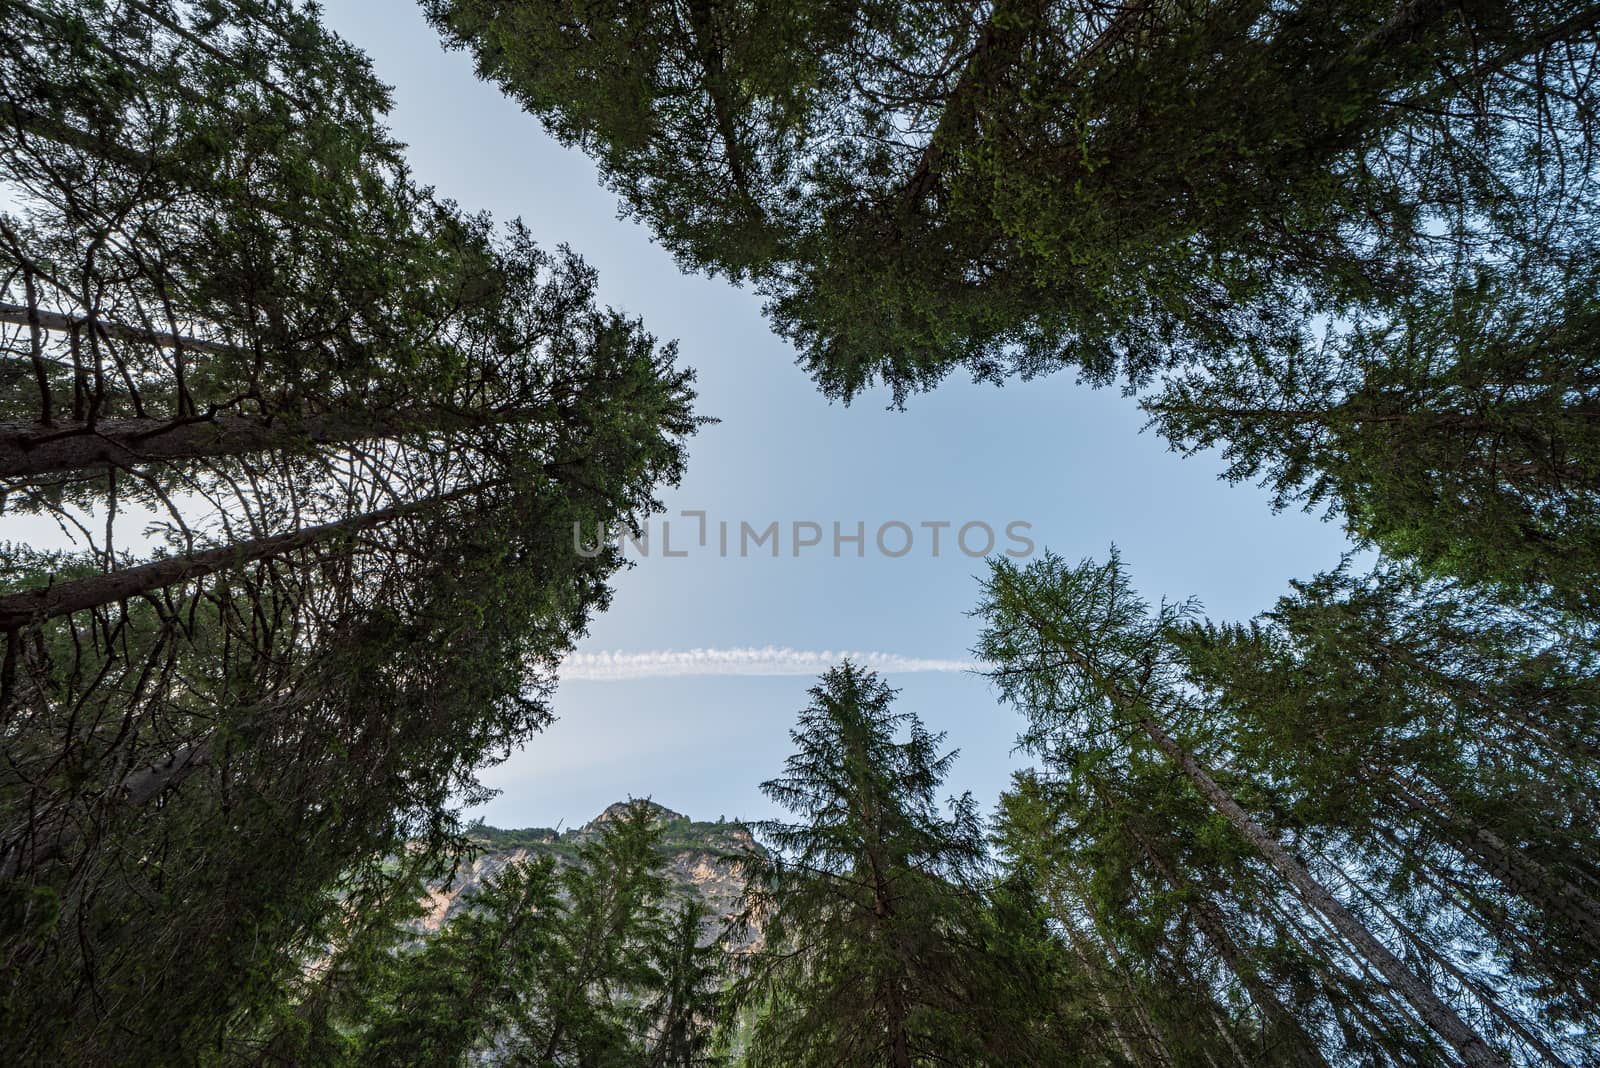 Looking upwards you can see a blue sky among the tall trees in which the wake of an airplane has remained